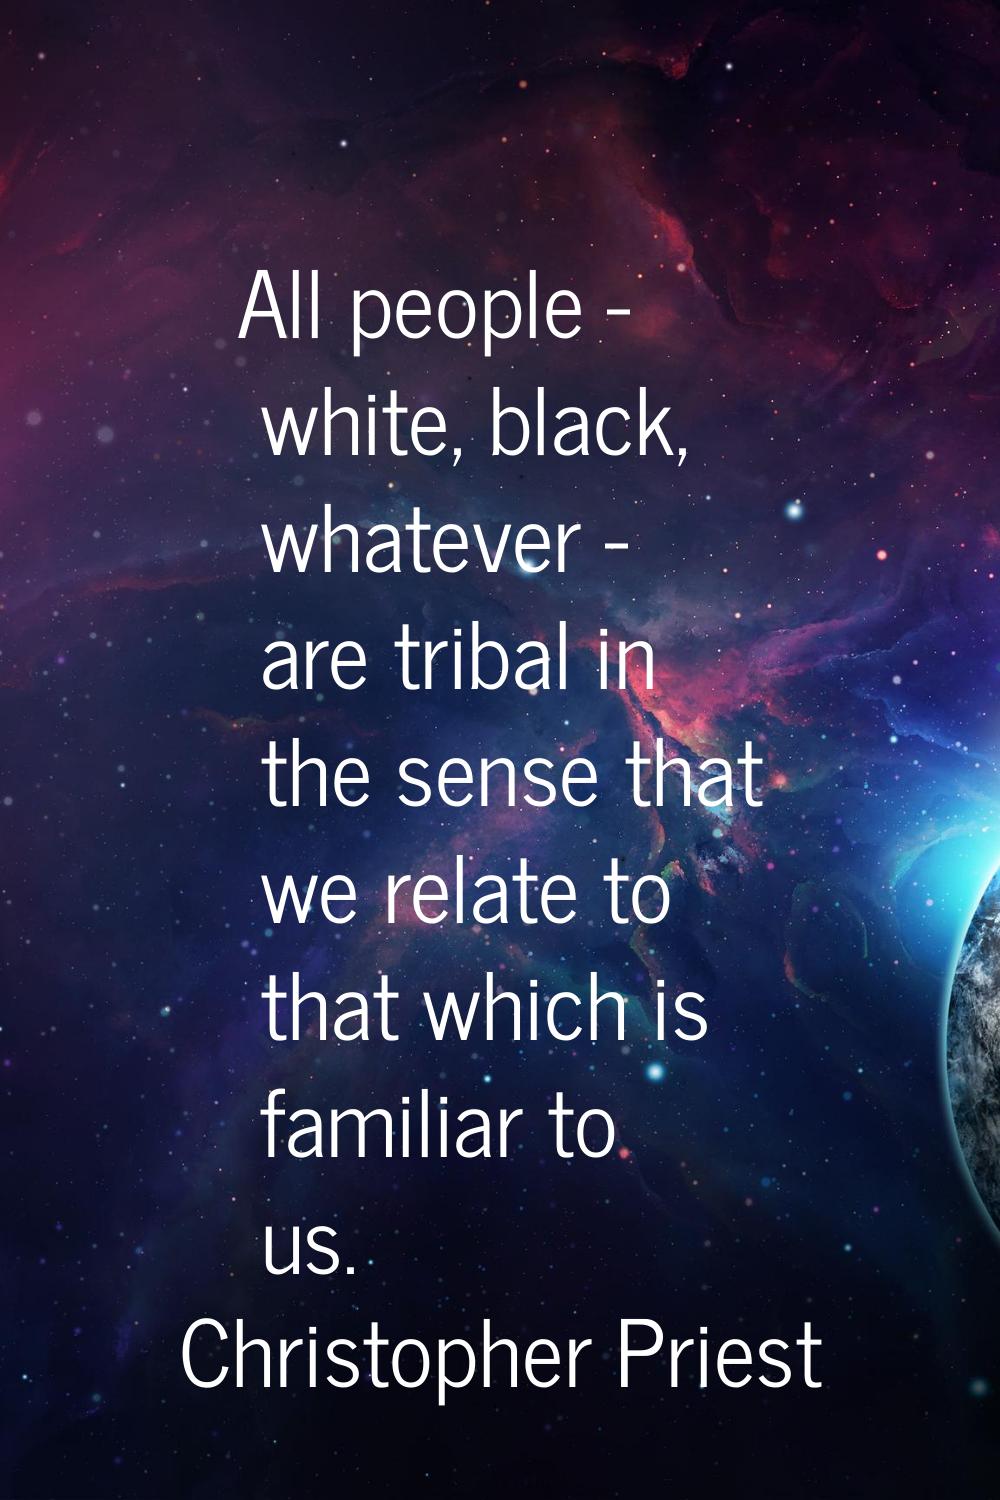 All people - white, black, whatever - are tribal in the sense that we relate to that which is famil